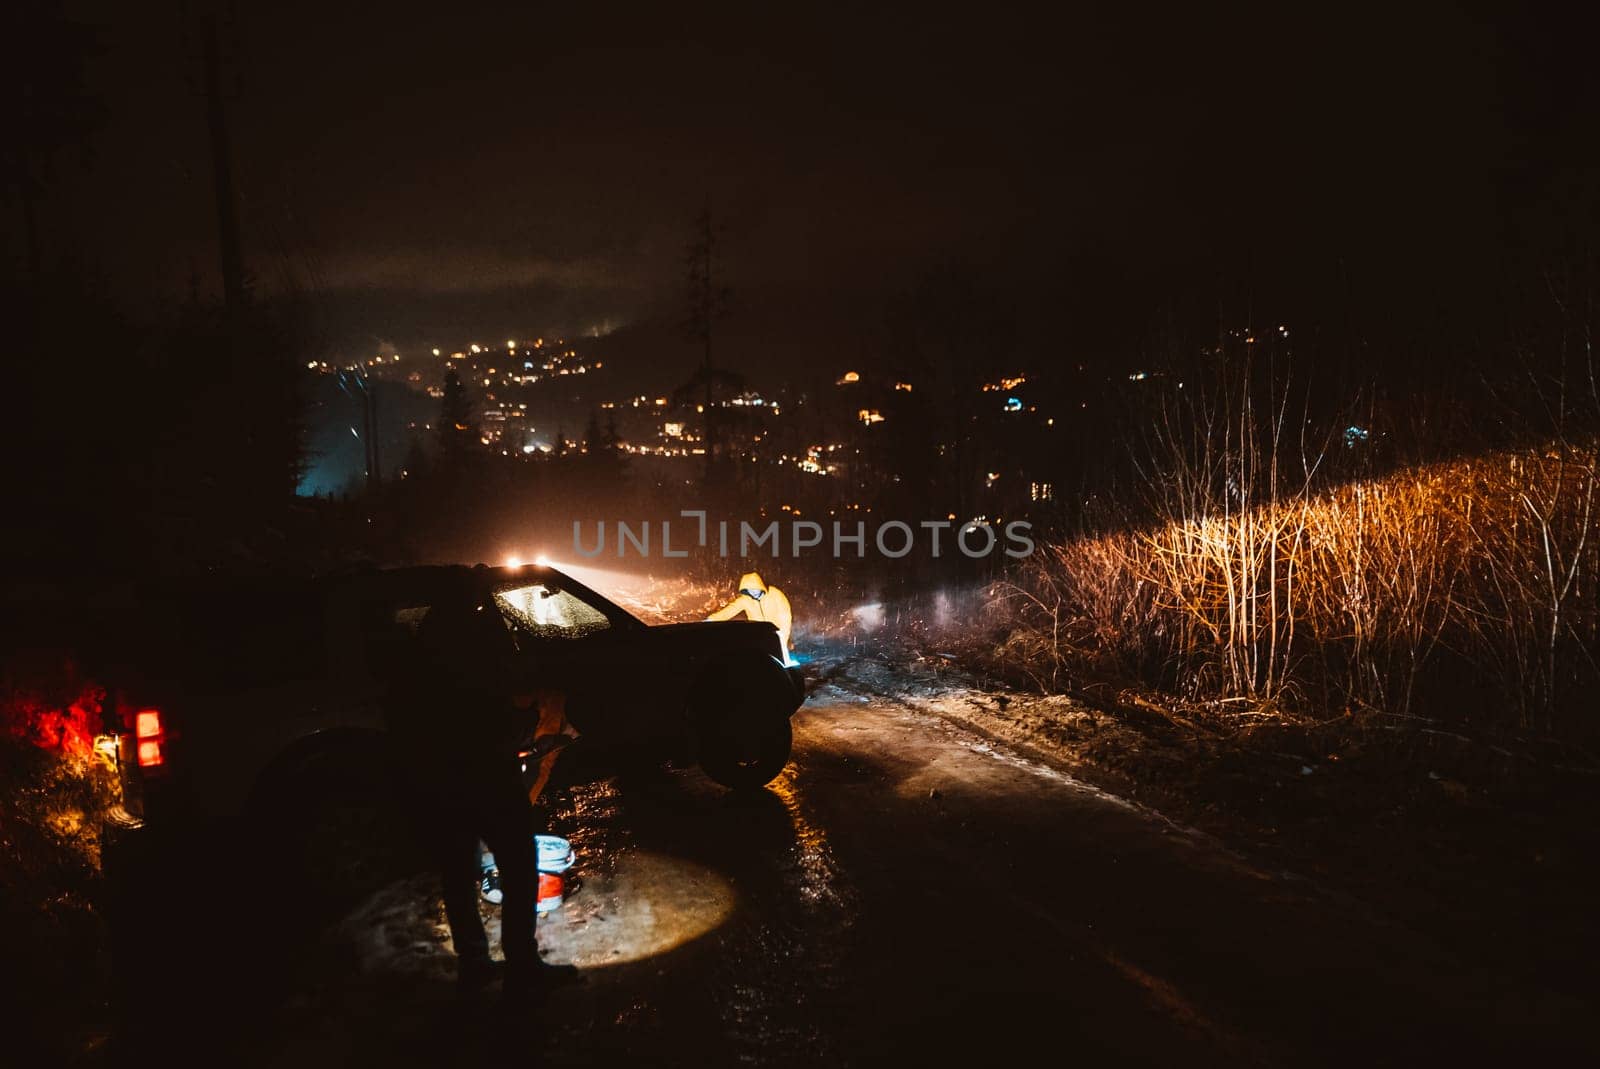 Man preparing bbq grill to cook on fire. Outside dark shot. Freeze moment of fire. High quality photo